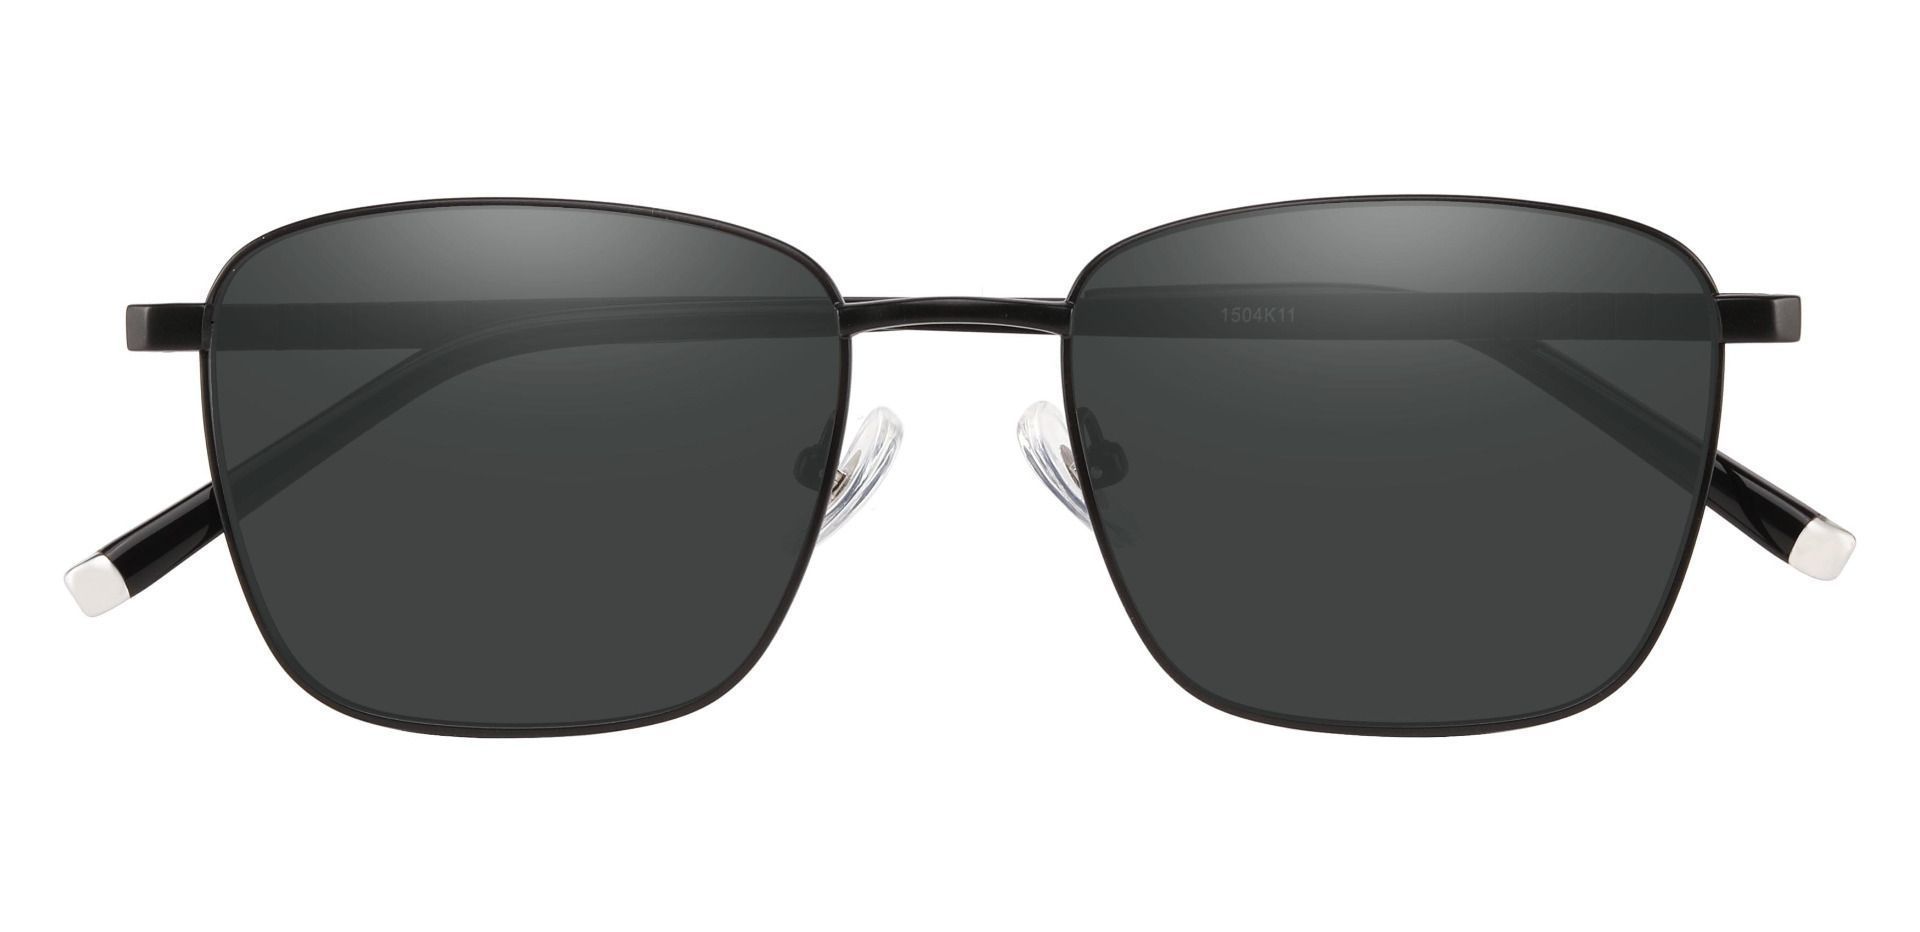 May Square Reading Sunglasses - Black Frame With Gray Lenses